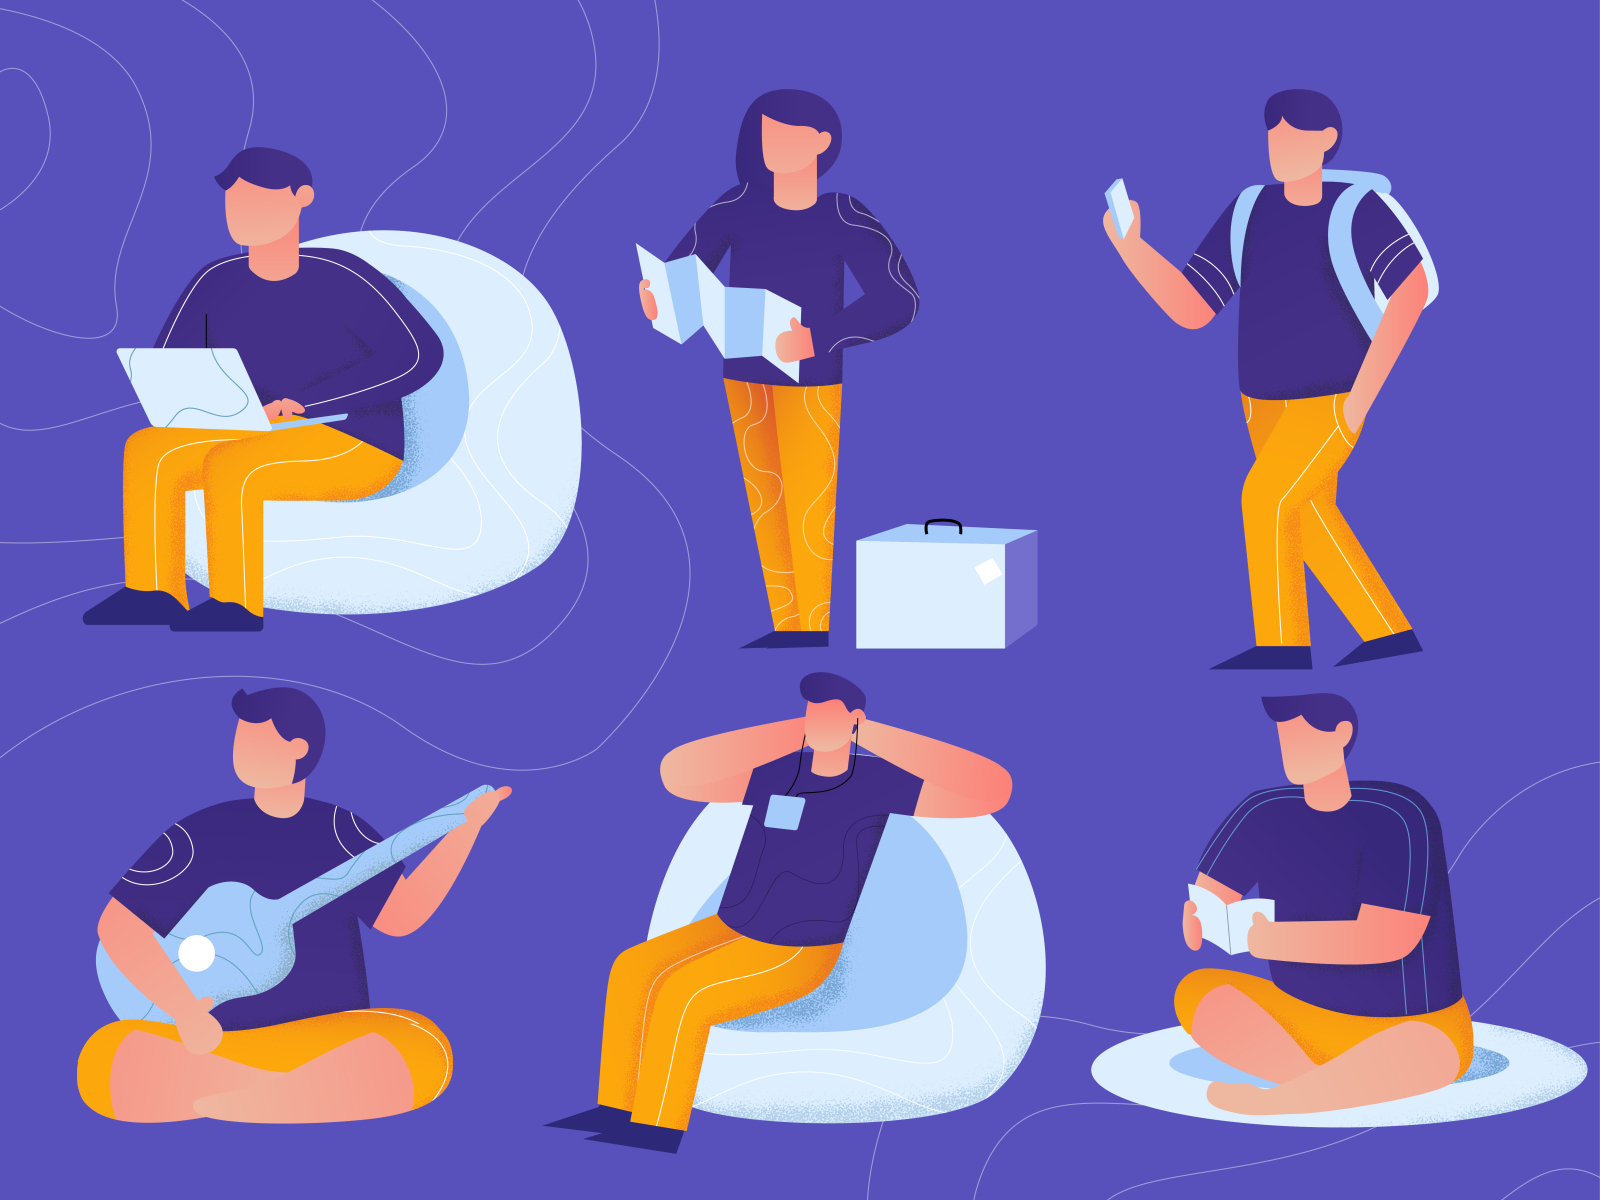 Daily Activities by Akreativa on Dribbble